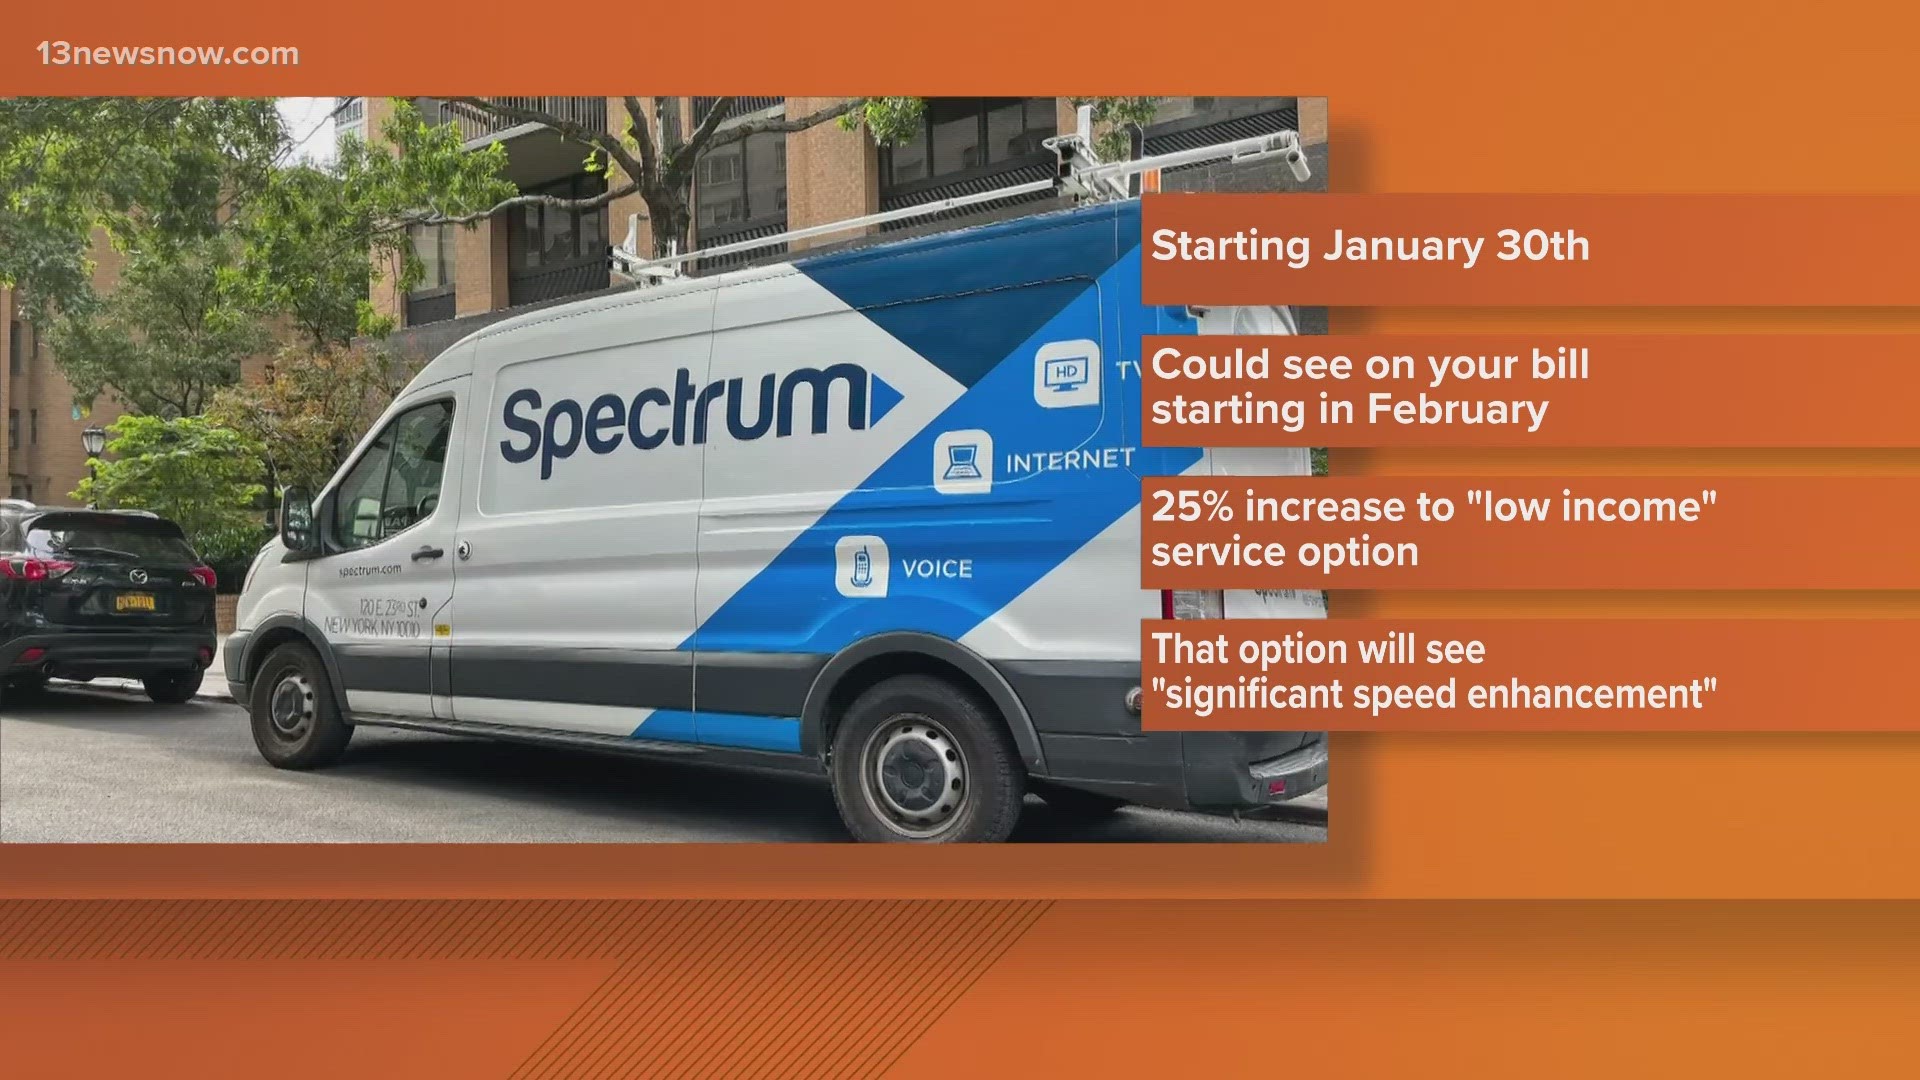 The company announced certain packages in its cable TV and internet options will see increased rates beginning on January 30.